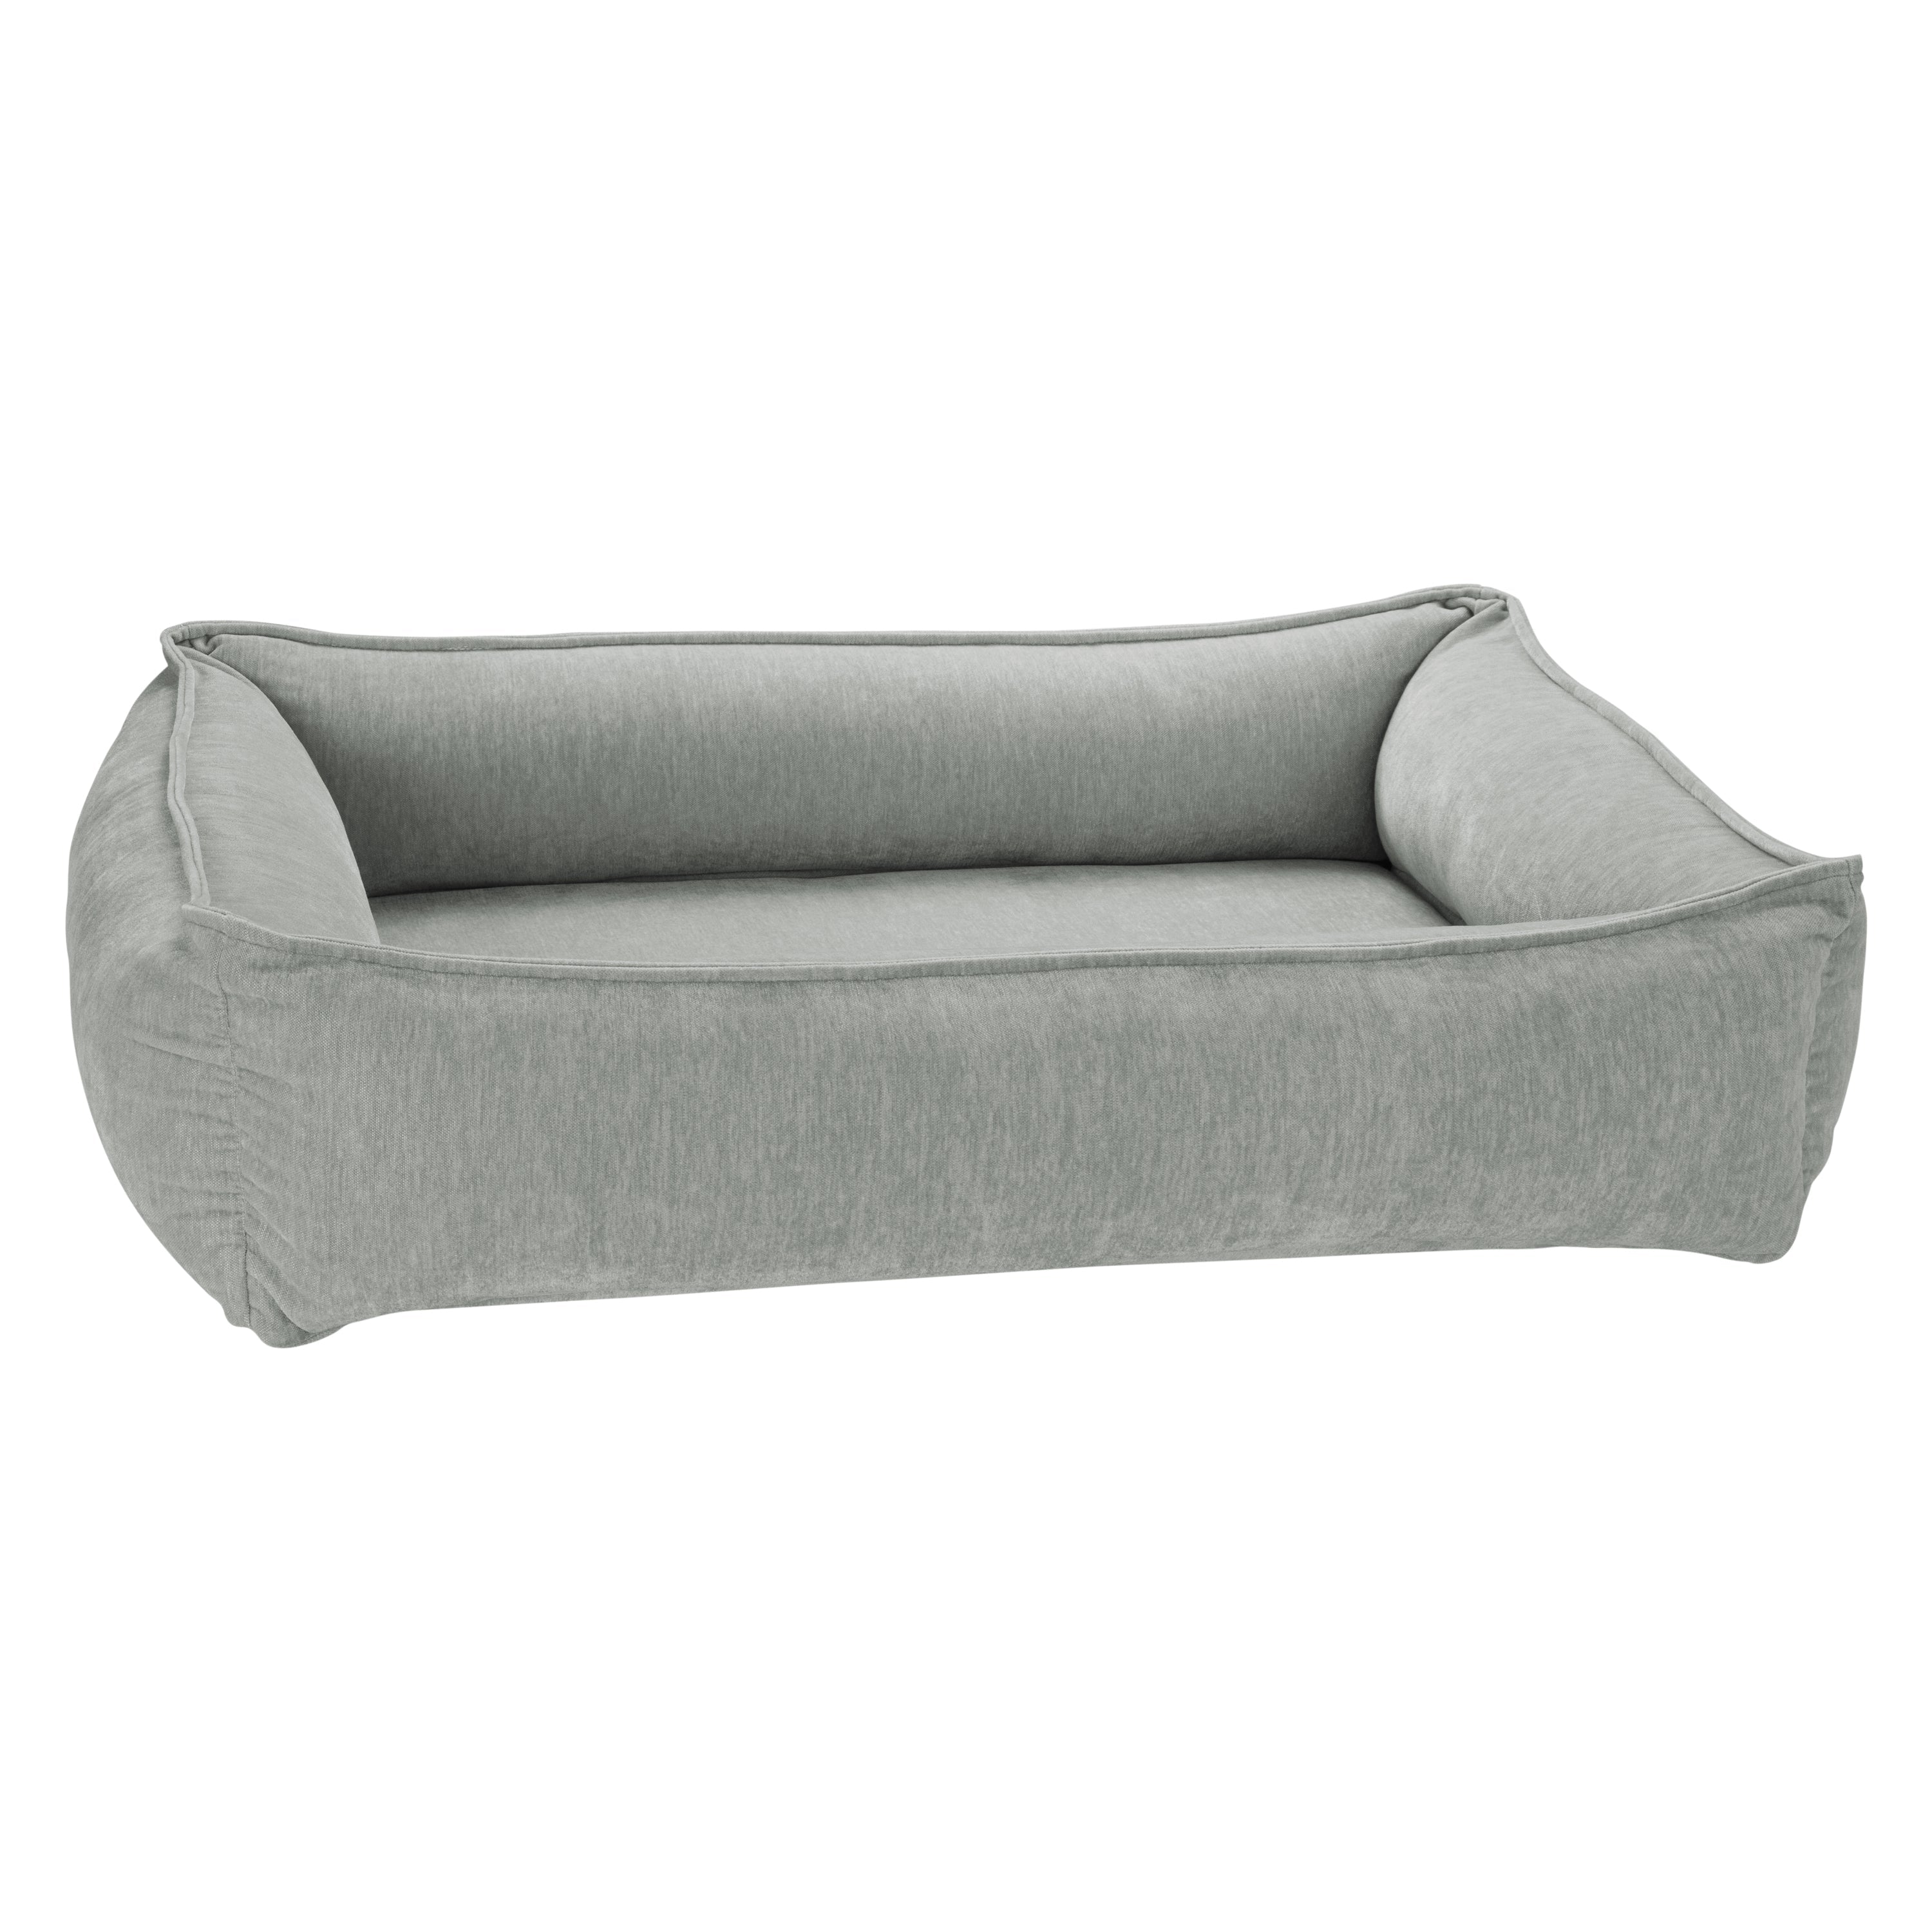 Oyster Urban Lounger